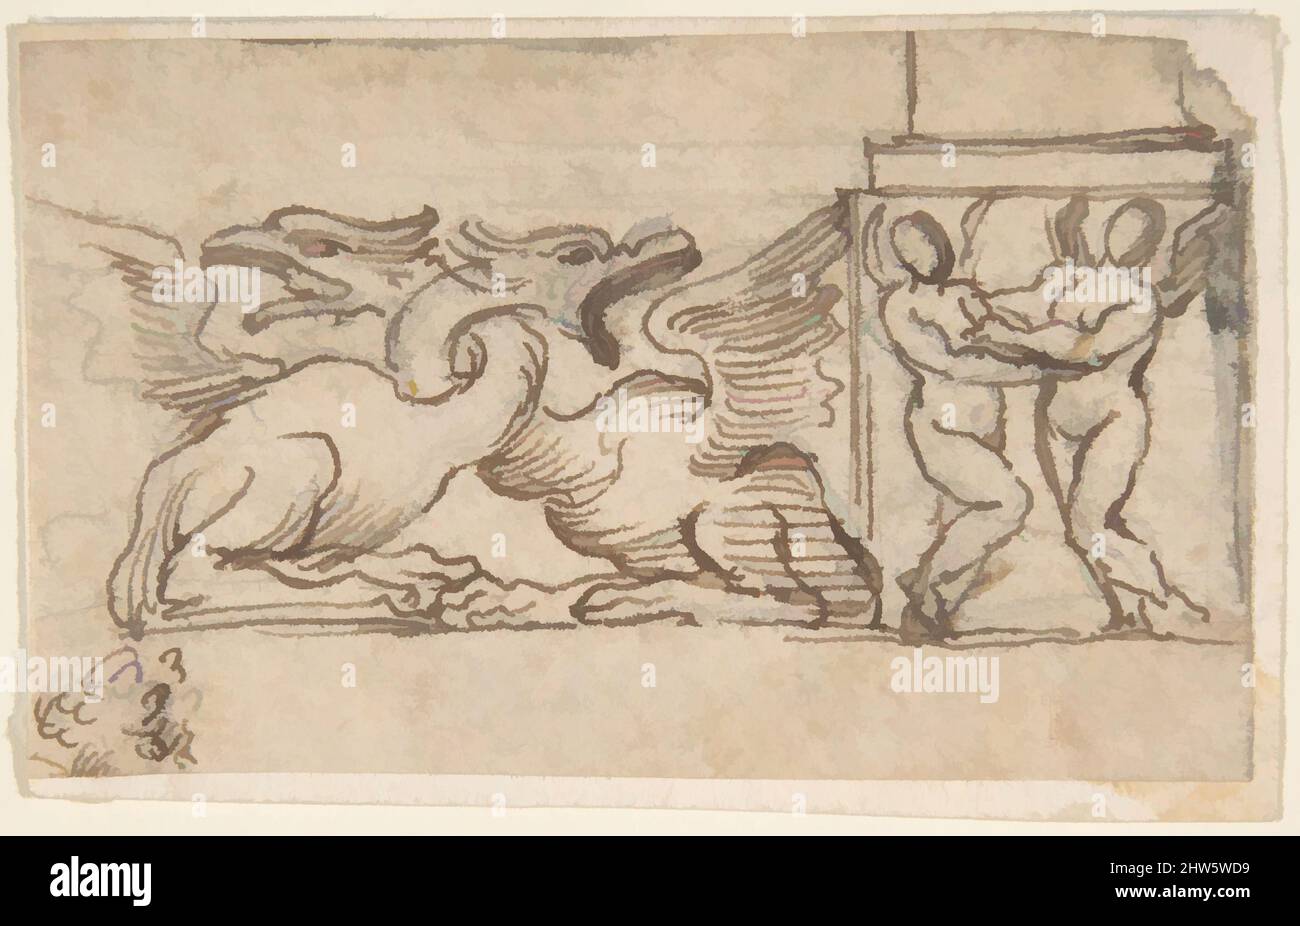 Art inspired by Ornamental Design of Winged Female Figures and Dragons, 17th century, Pen and brown ink, over leadpoint or black chalk., 1 15/16 x 3 1/8 in. (4.9 x 7.9 cm), Drawings, Anonymous, Italian, 17th century, Classic works modernized by Artotop with a splash of modernity. Shapes, color and value, eye-catching visual impact on art. Emotions through freedom of artworks in a contemporary way. A timeless message pursuing a wildly creative new direction. Artists turning to the digital medium and creating the Artotop NFT Stock Photo